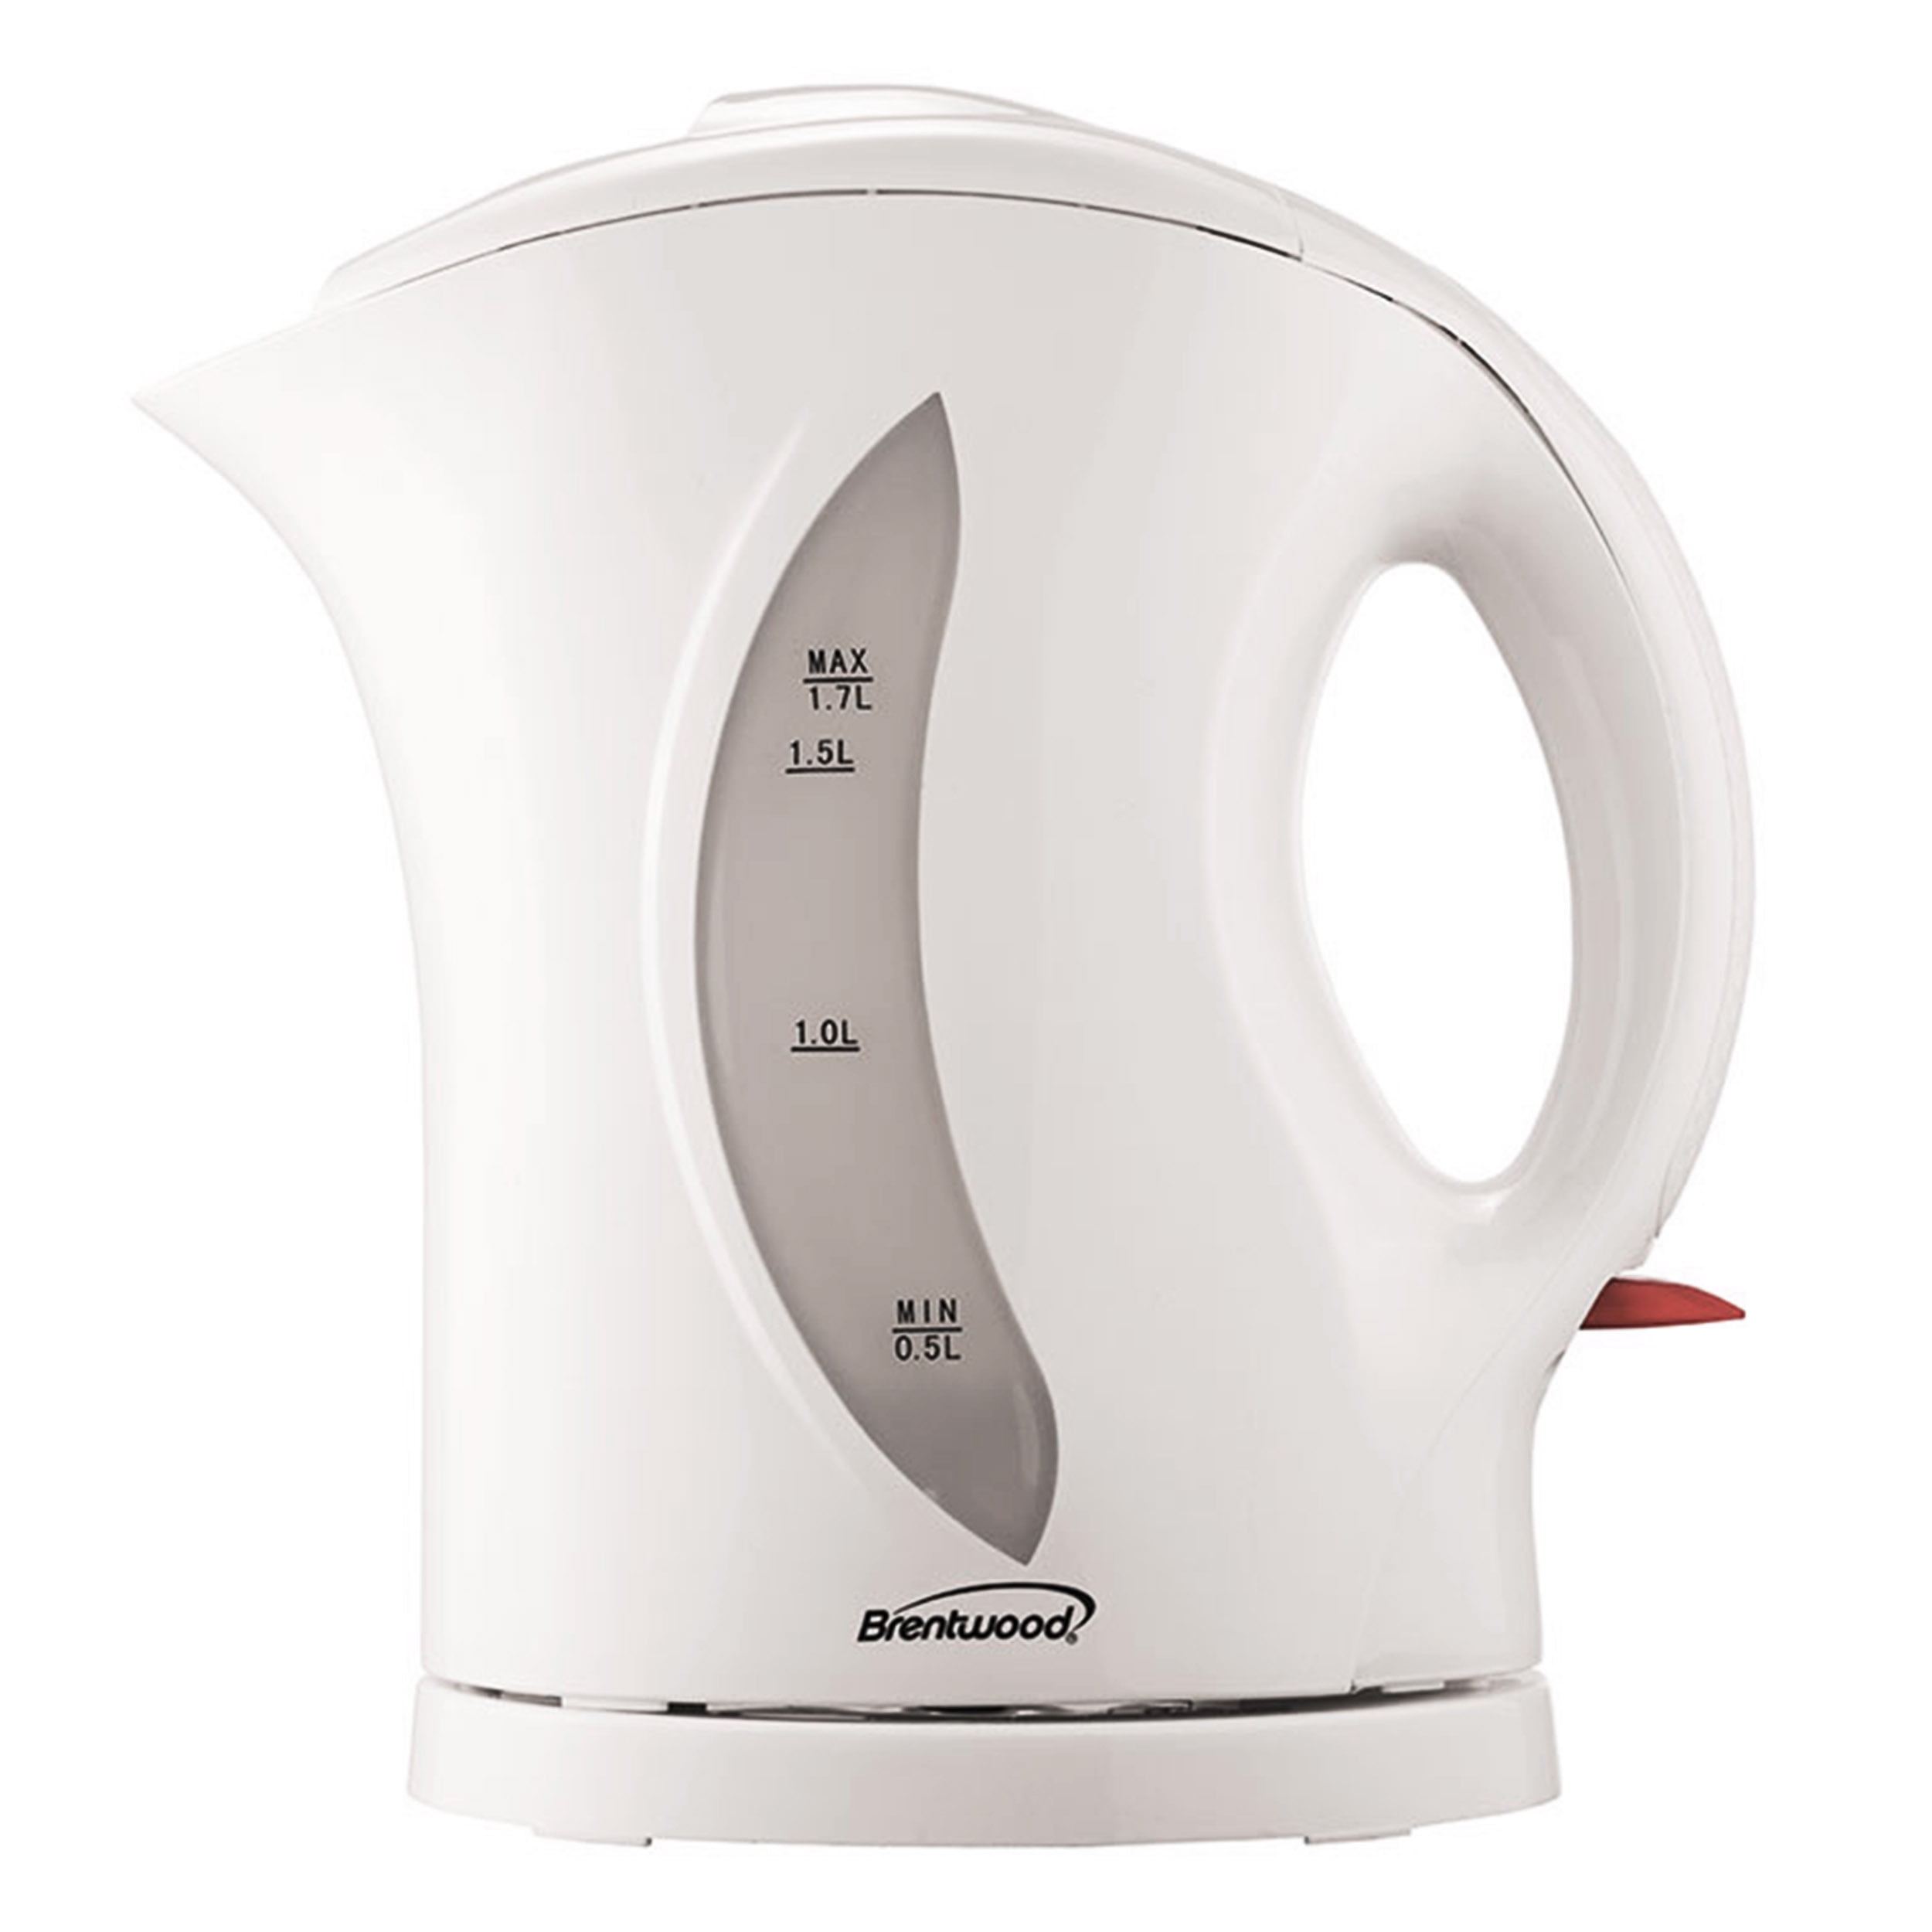 Beautiful 1-Liter Electric Gooseneck Kettle 1200 W, White Icing by Drew  Barrymore